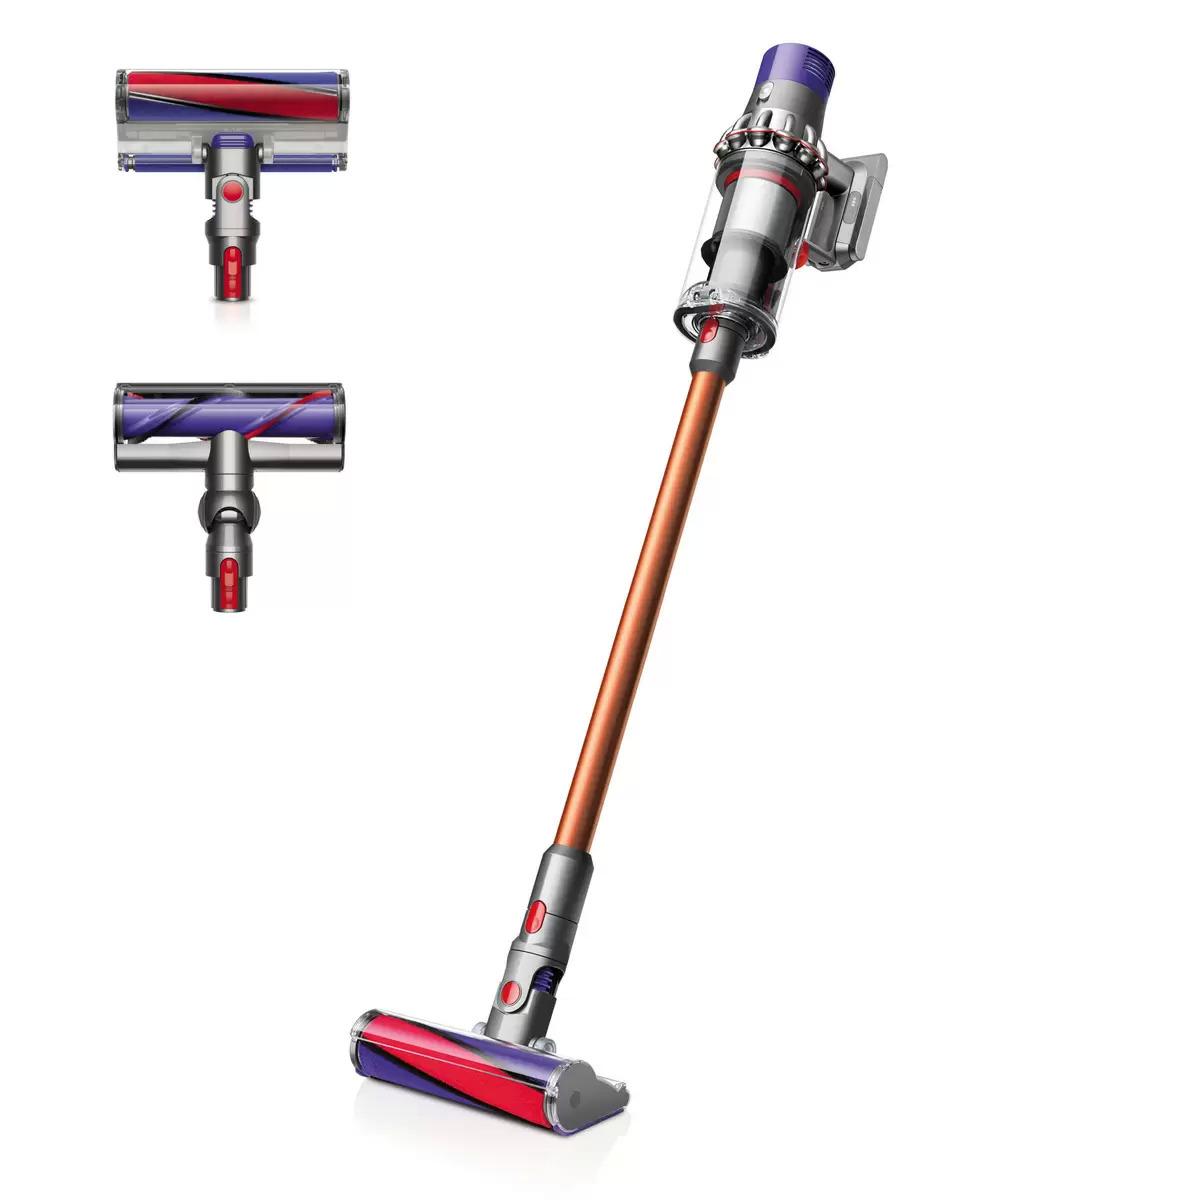 Dyson V10 Absolute Cordless Vacuum for $399.99 Shipped